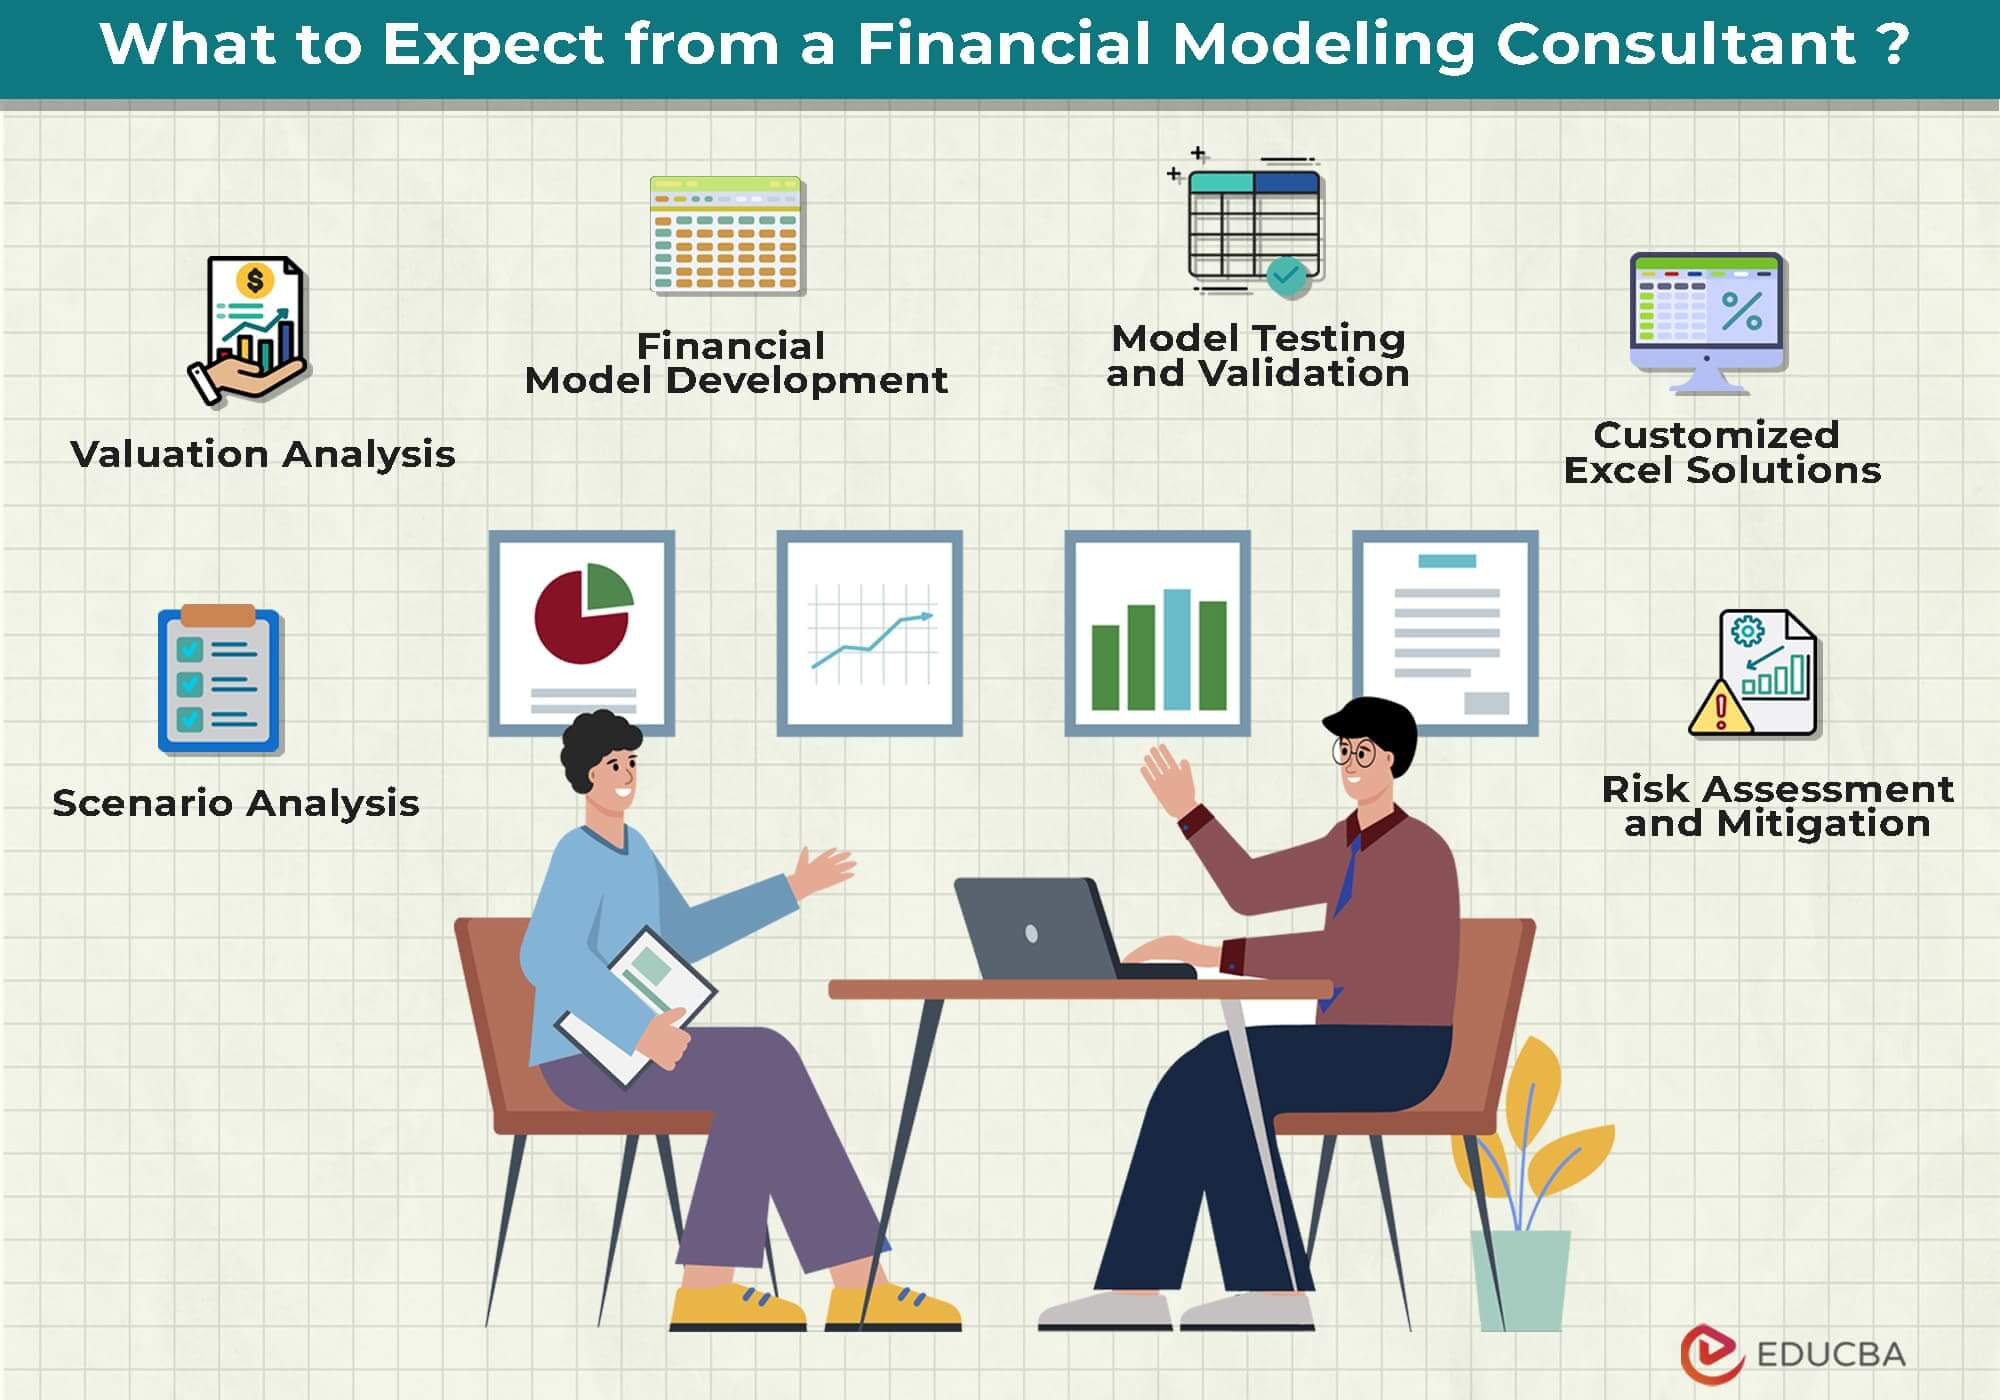 What to Expect from a Financial Modeling Consultant